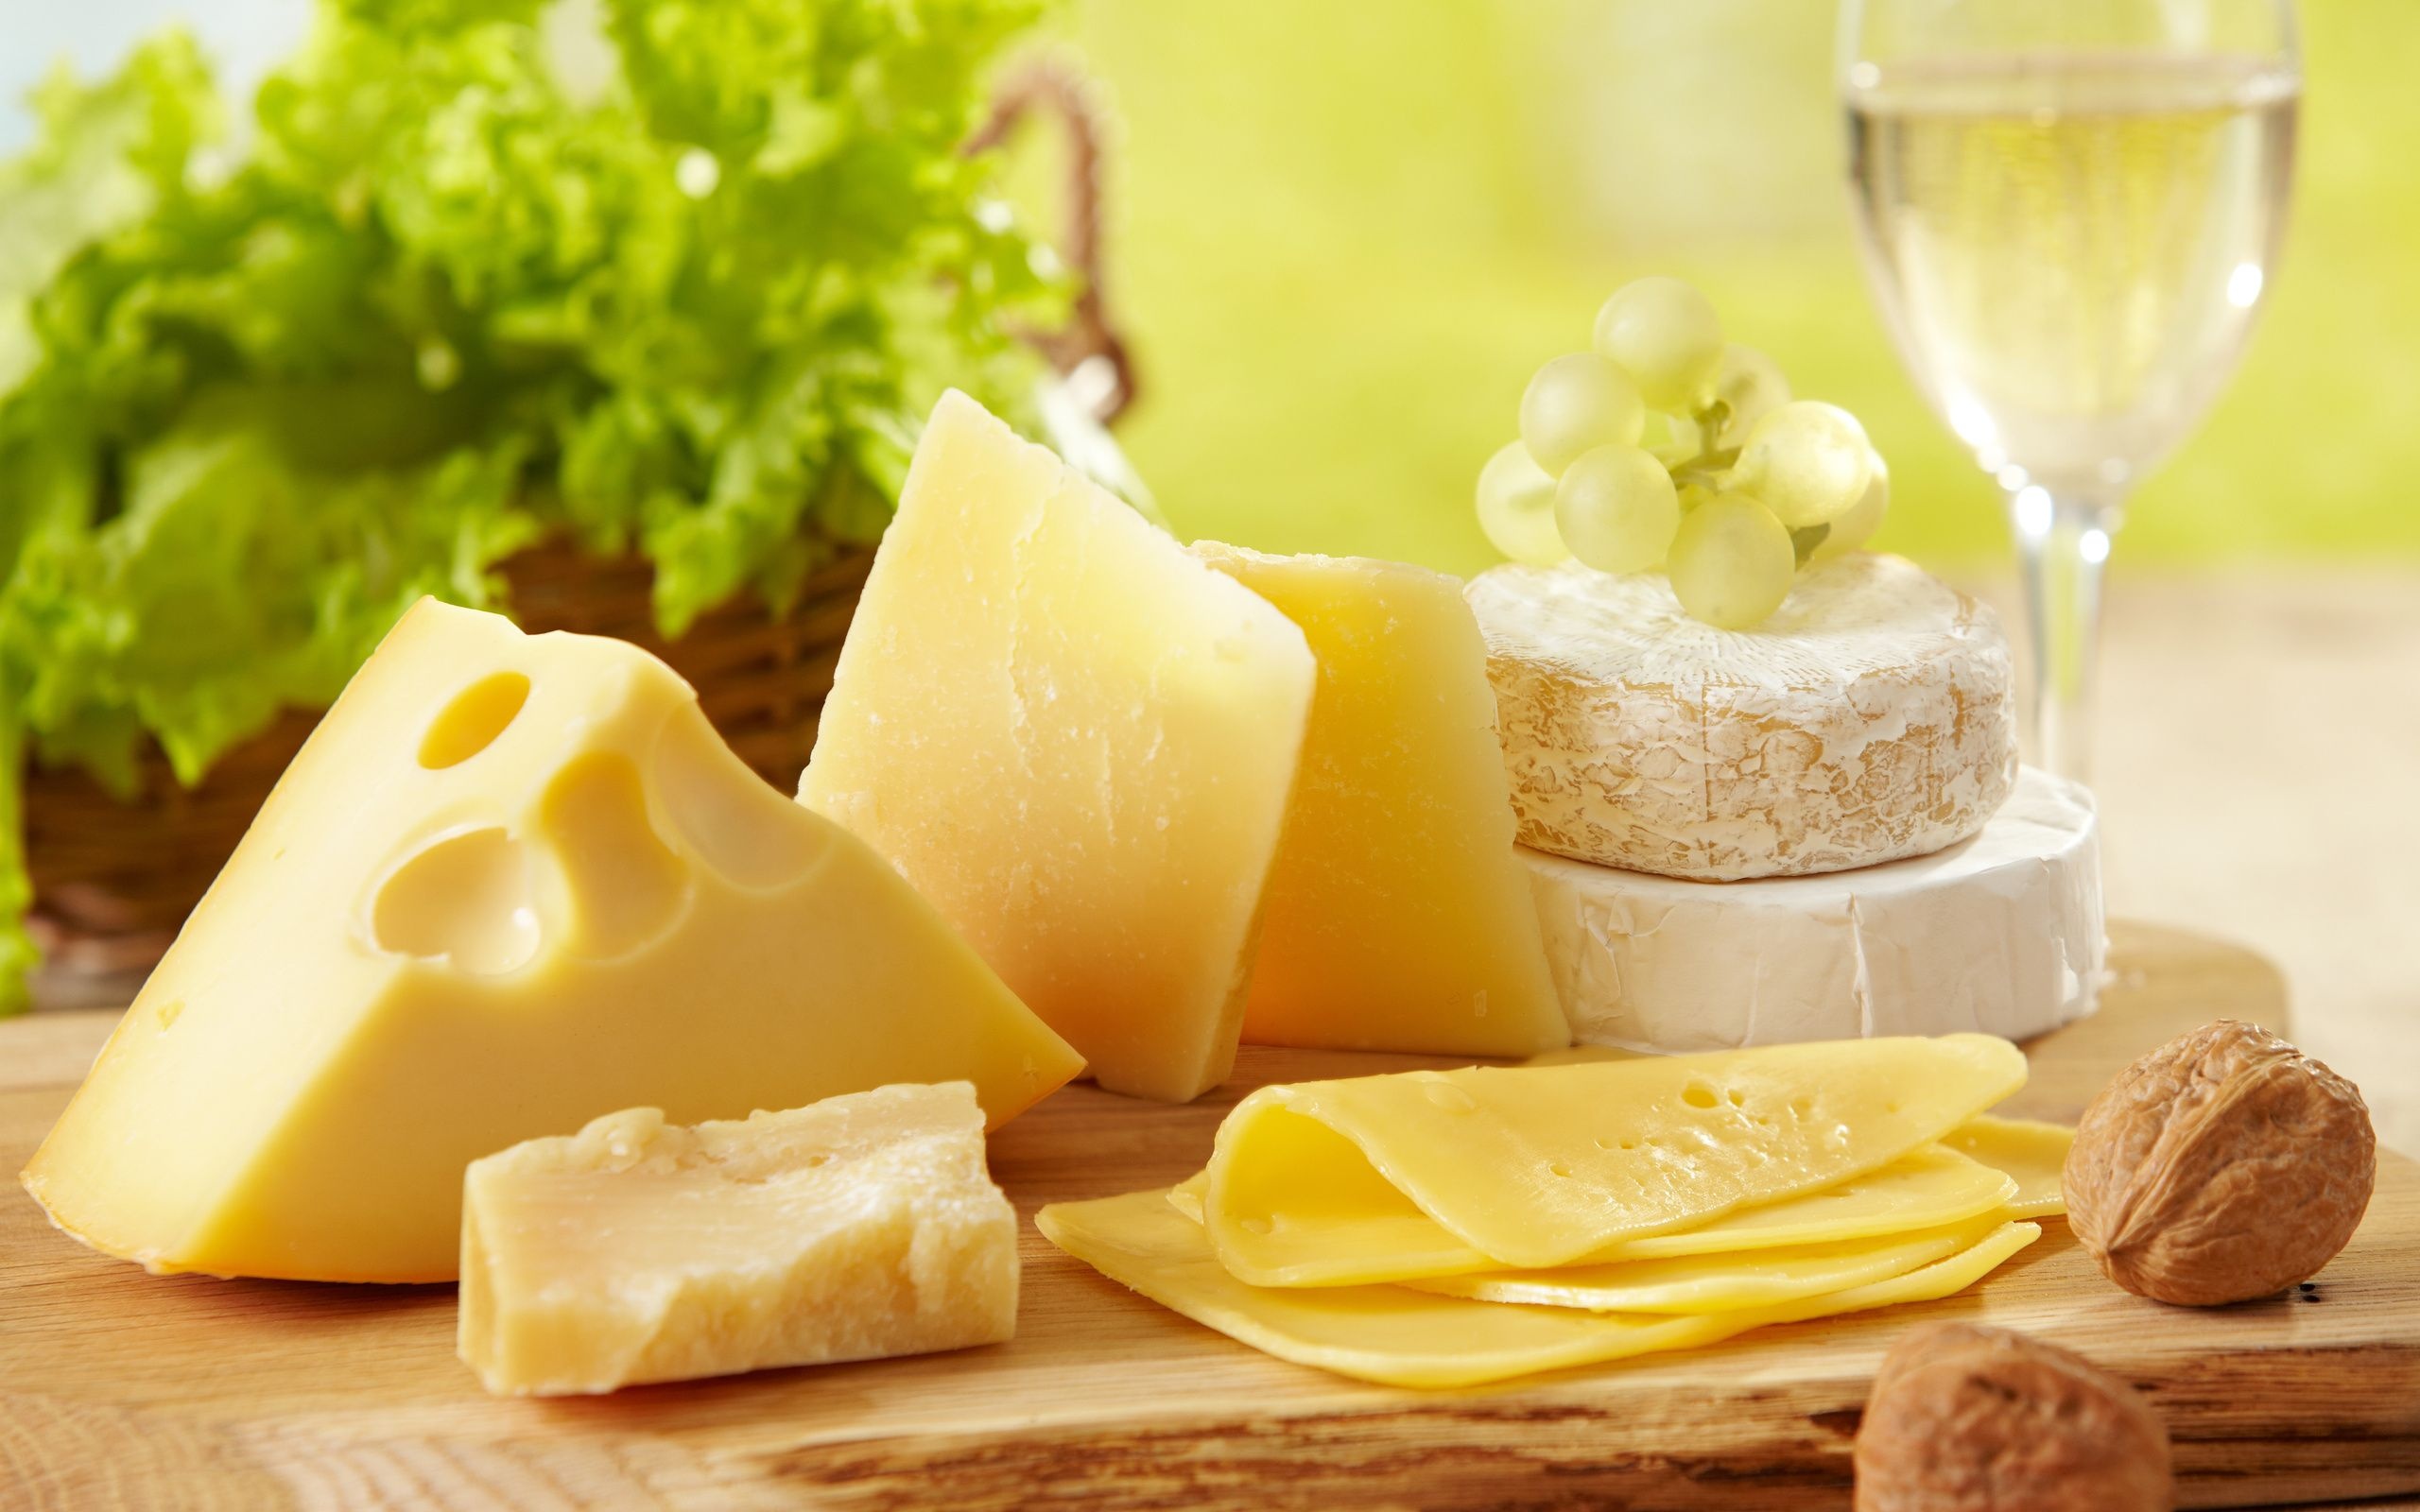 Cheese: Milk coagulated, separated, and then pressed into form. 2560x1600 HD Wallpaper.